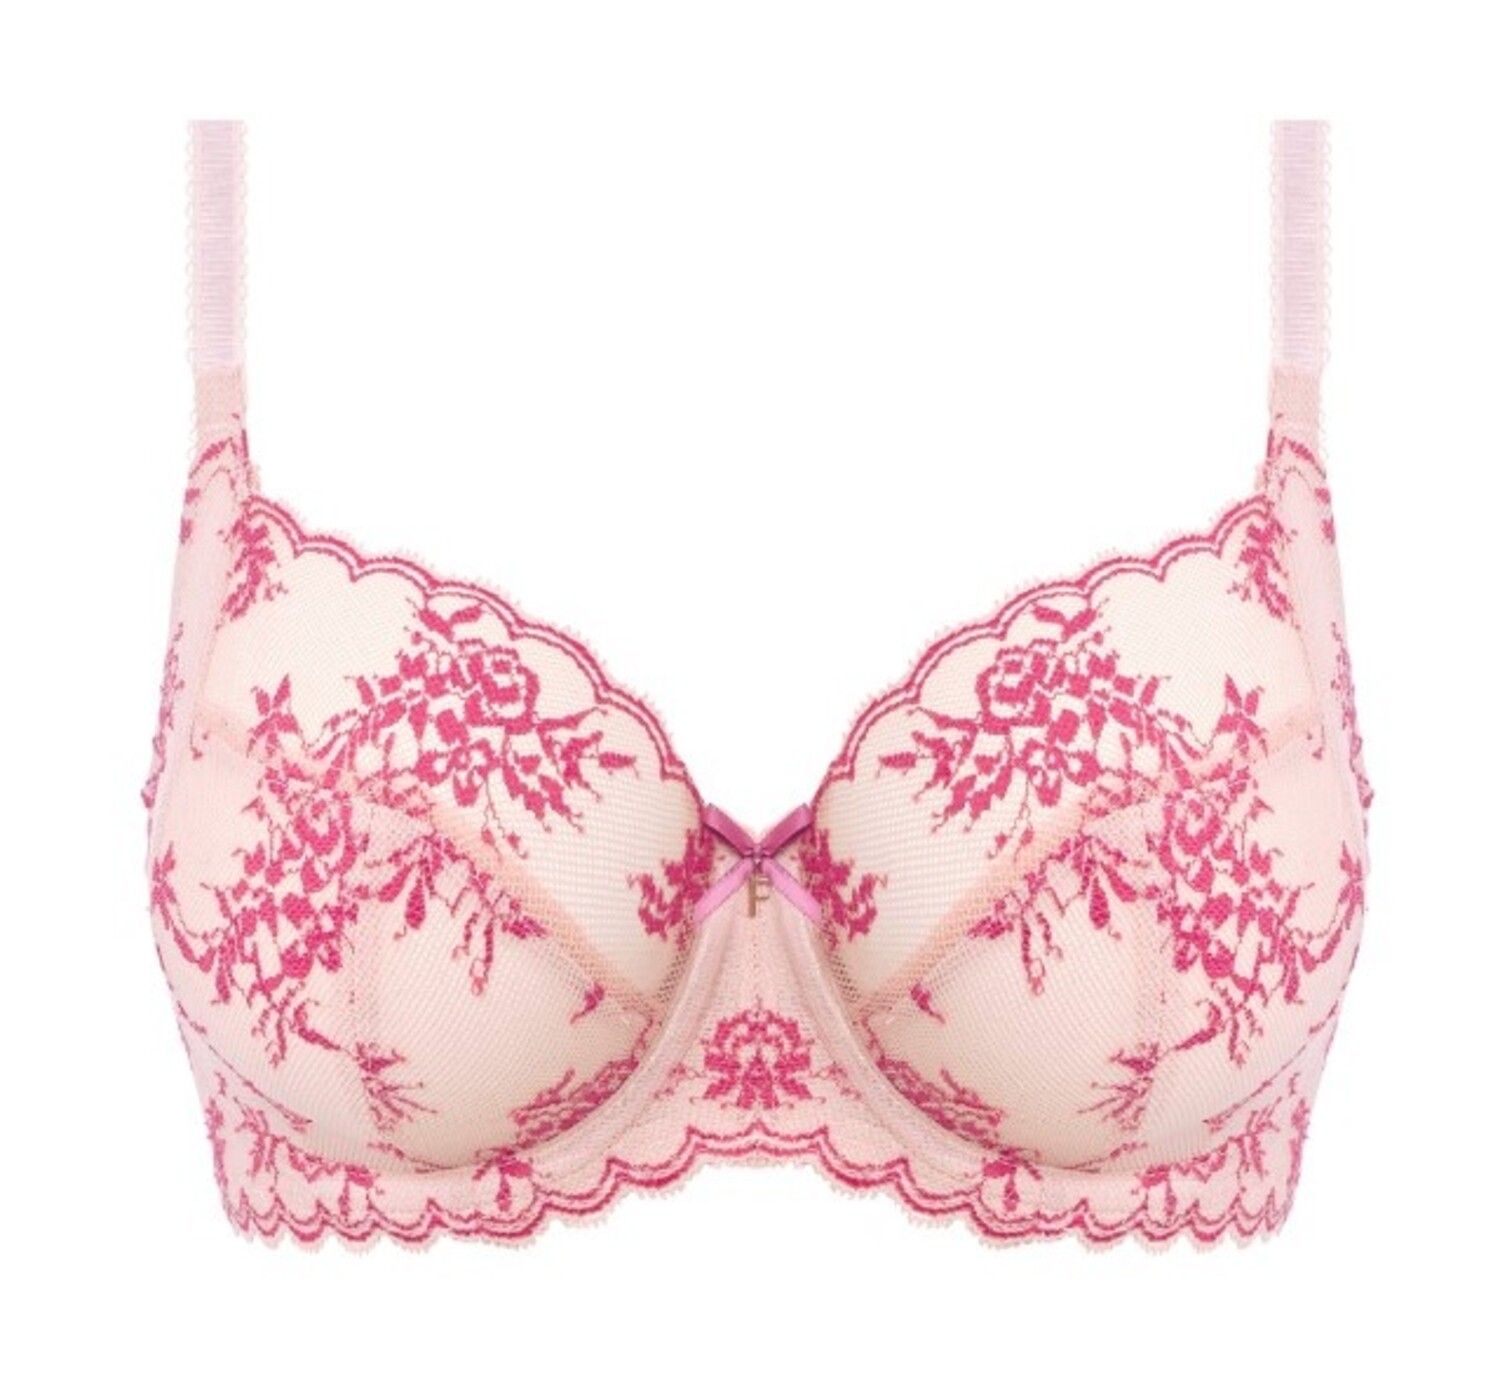 Freya Signature Barely Pink Moulded Spacer Bra from Freya